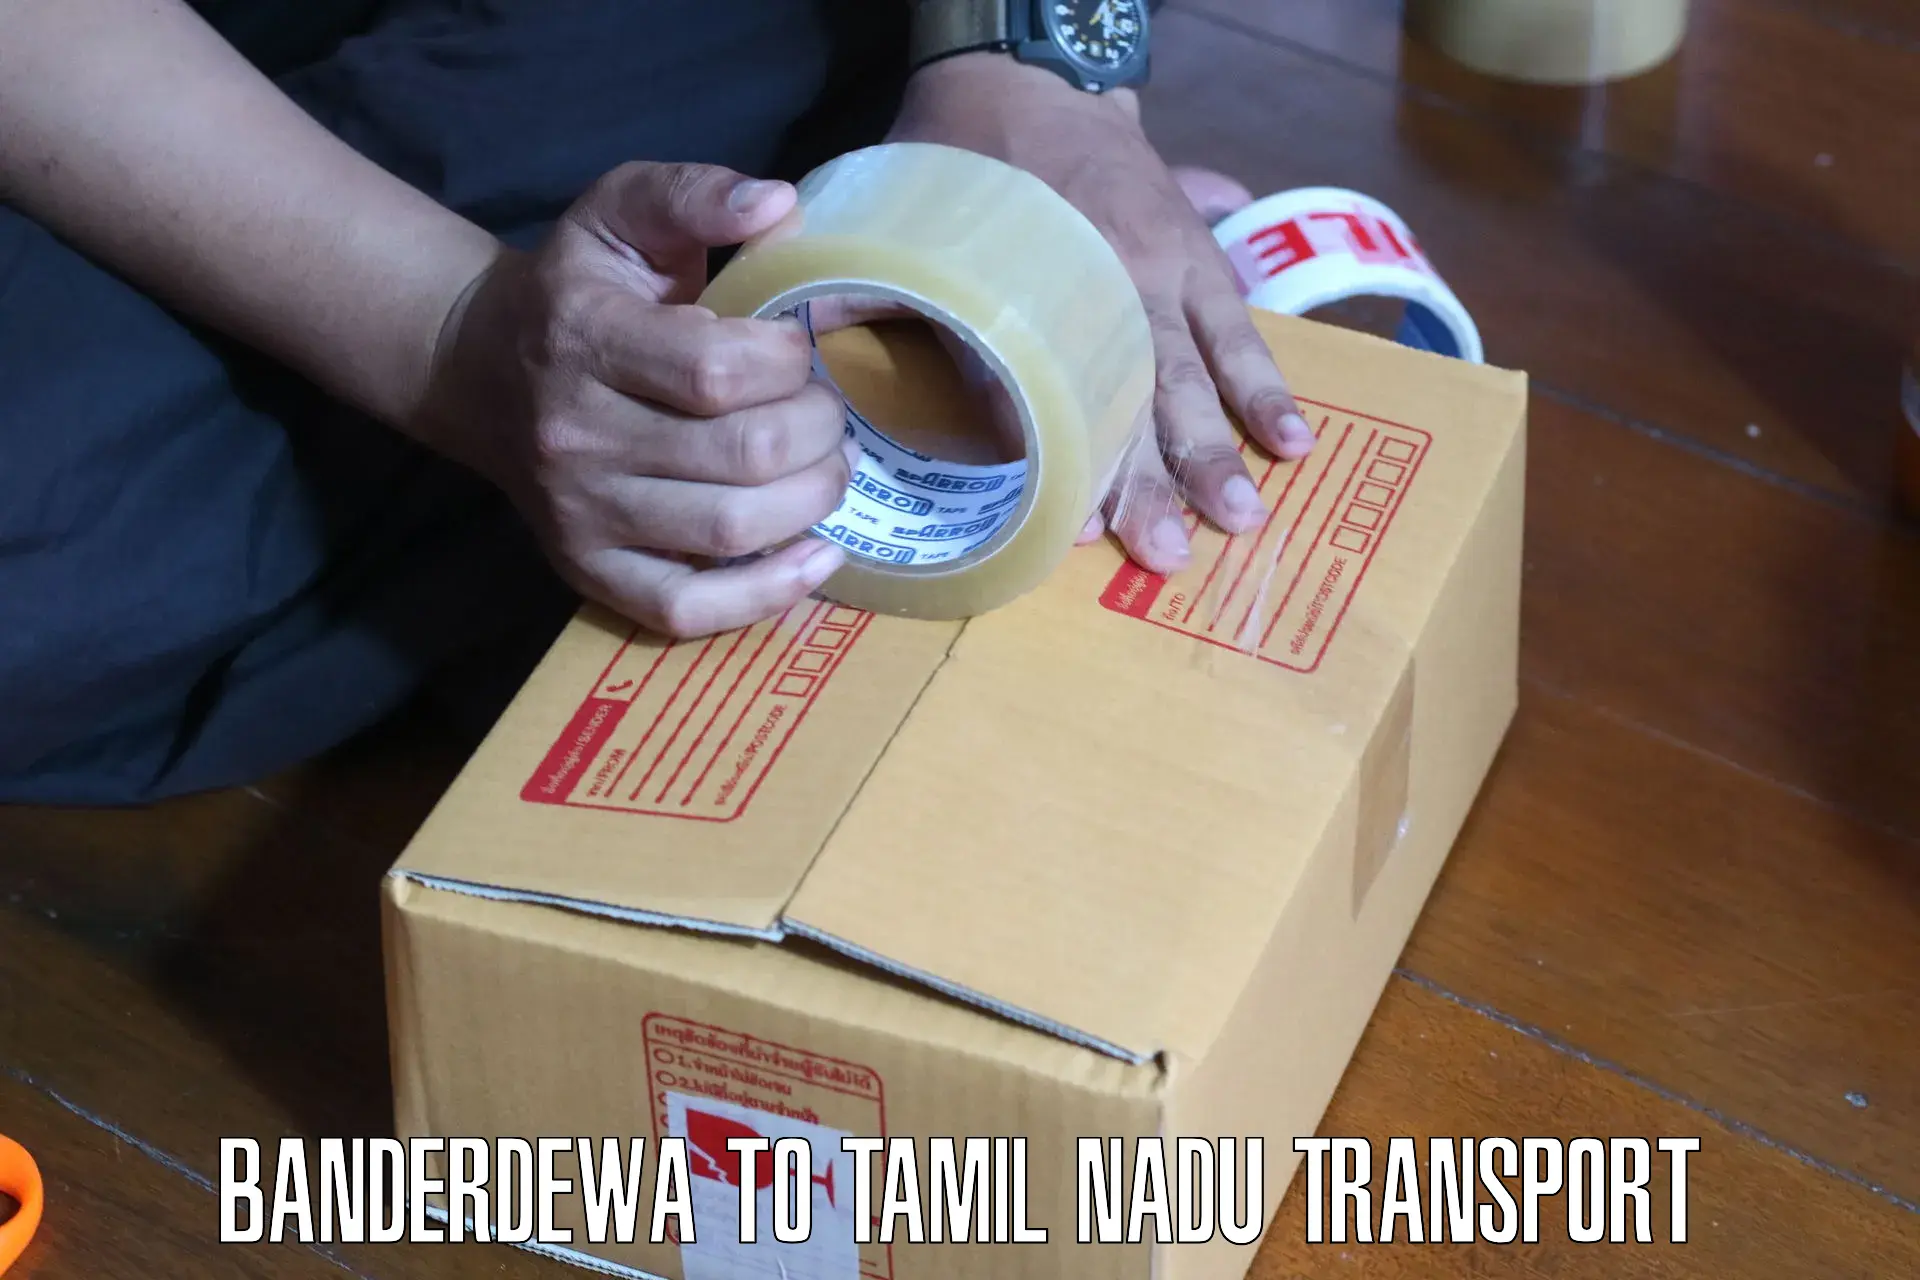 Domestic goods transportation services Banderdewa to Trichy